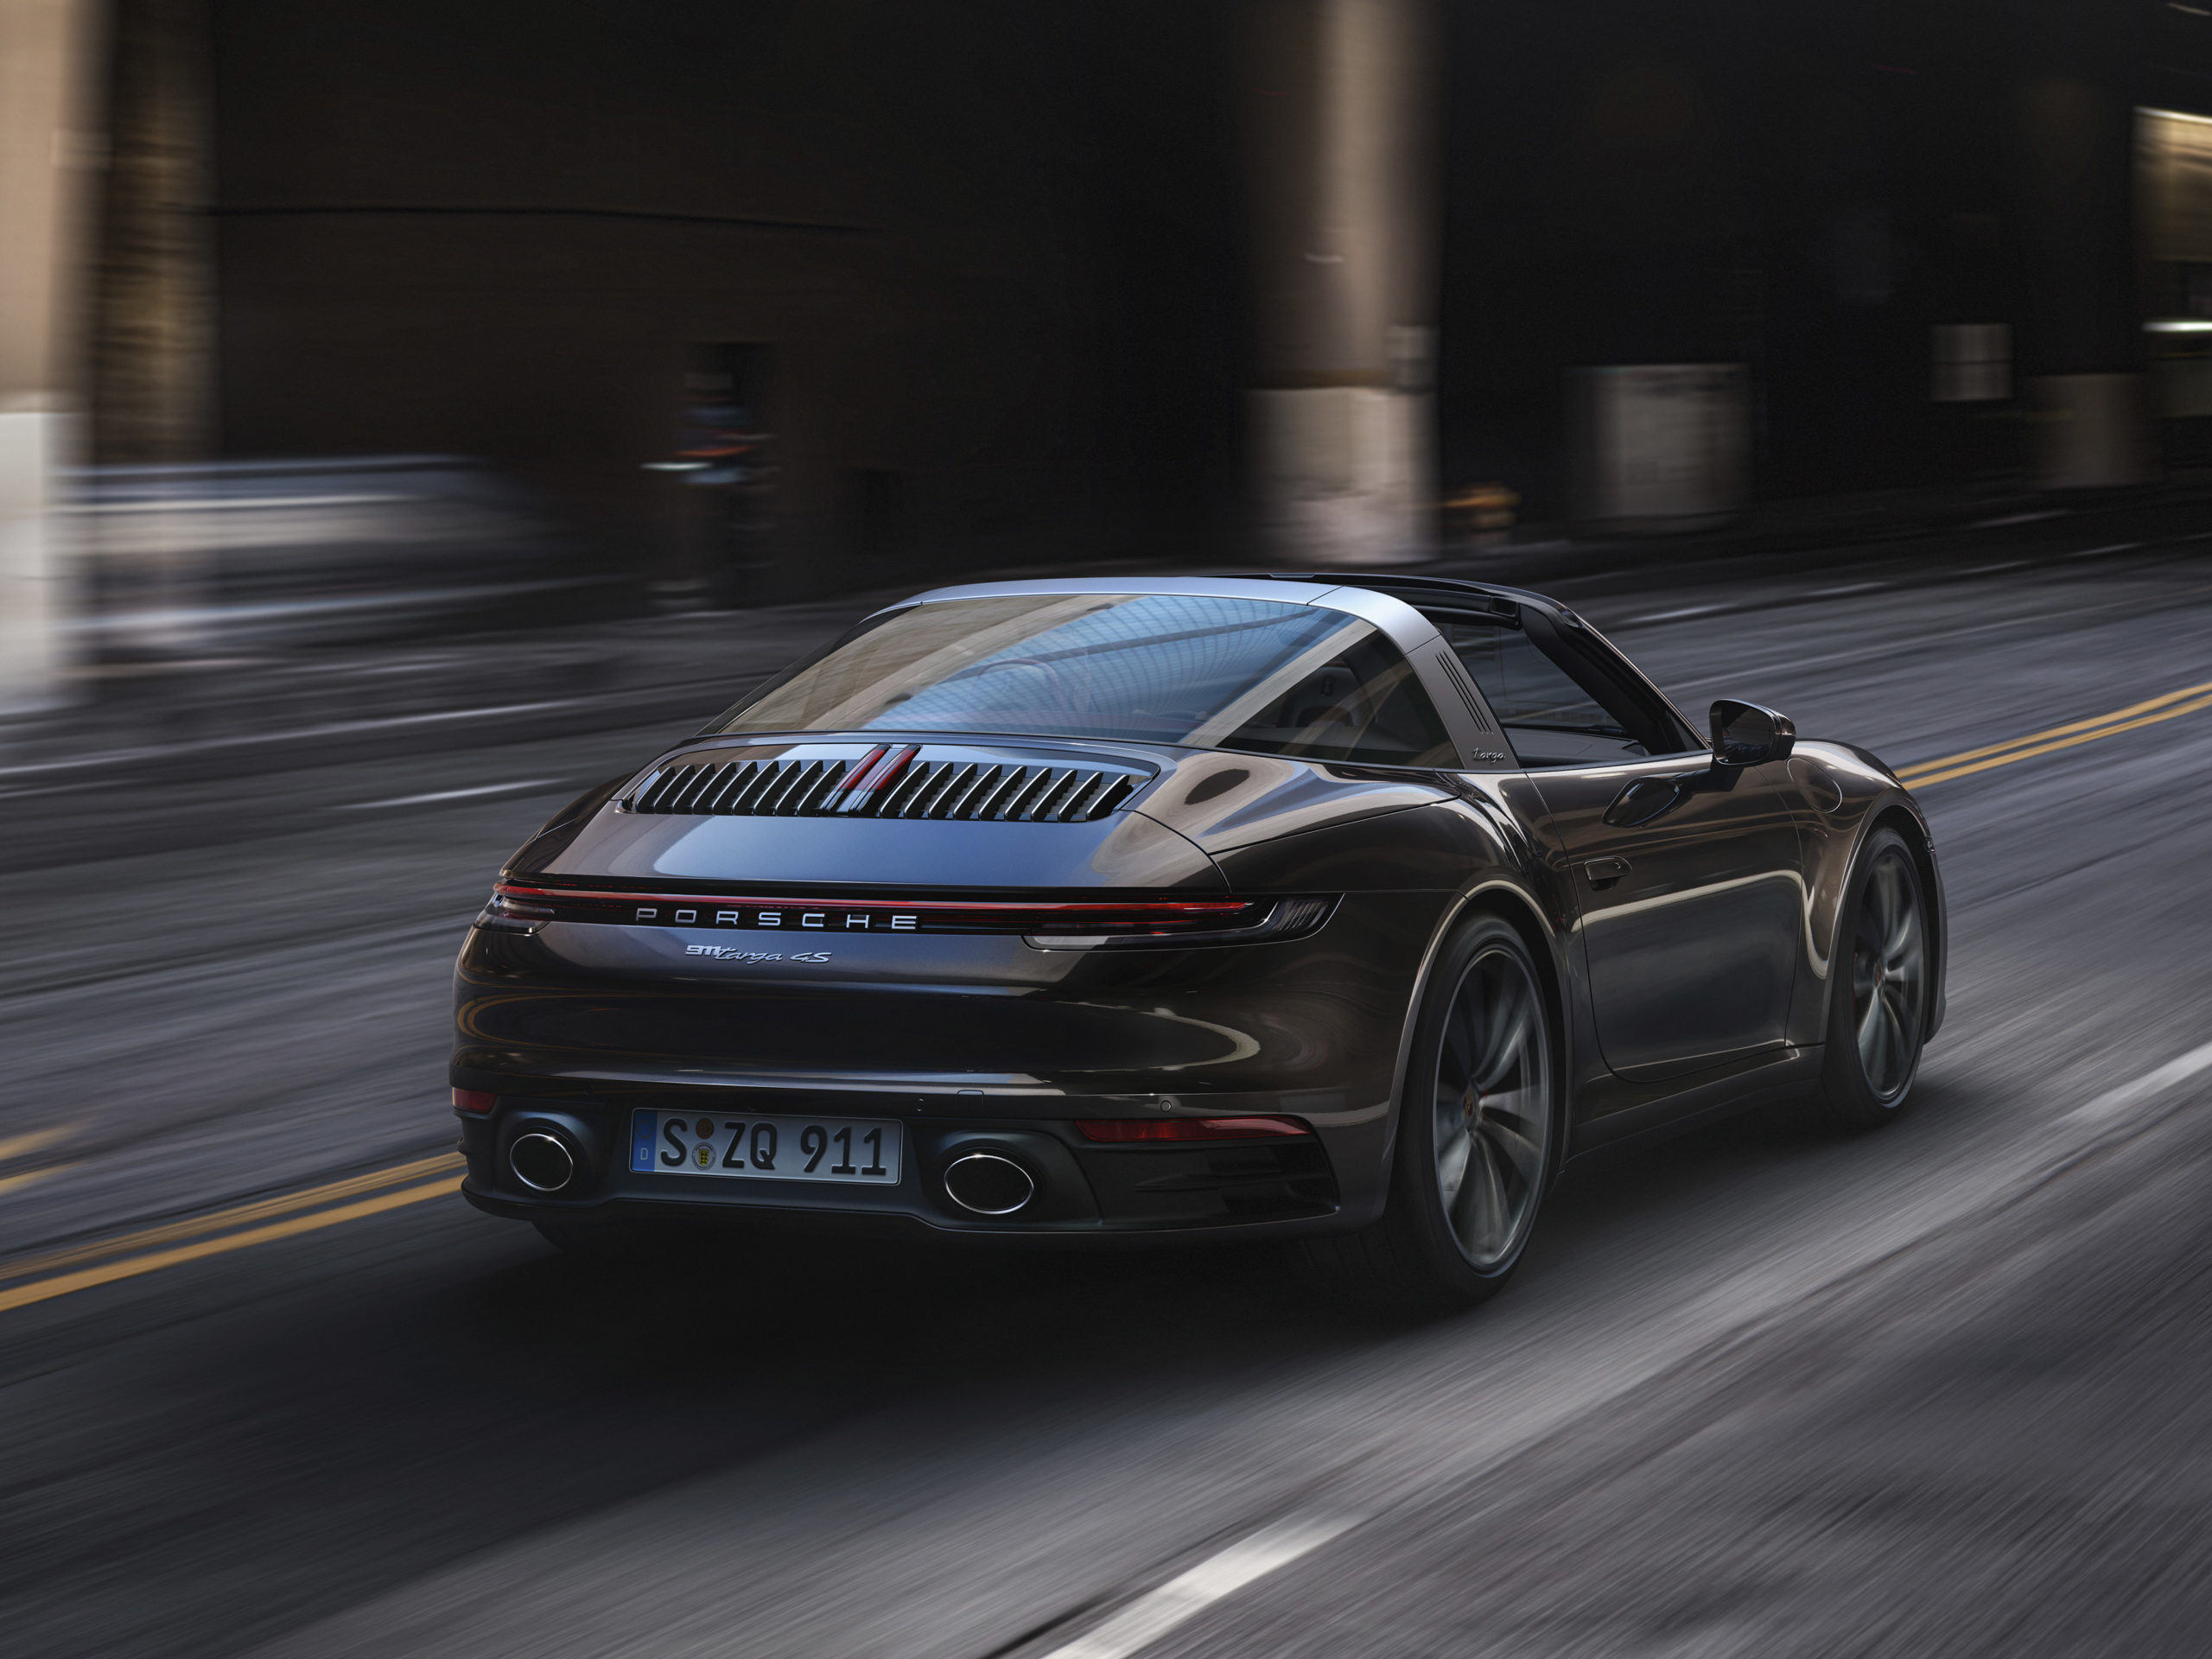 10 facts about the new 992 Targa - Total 911